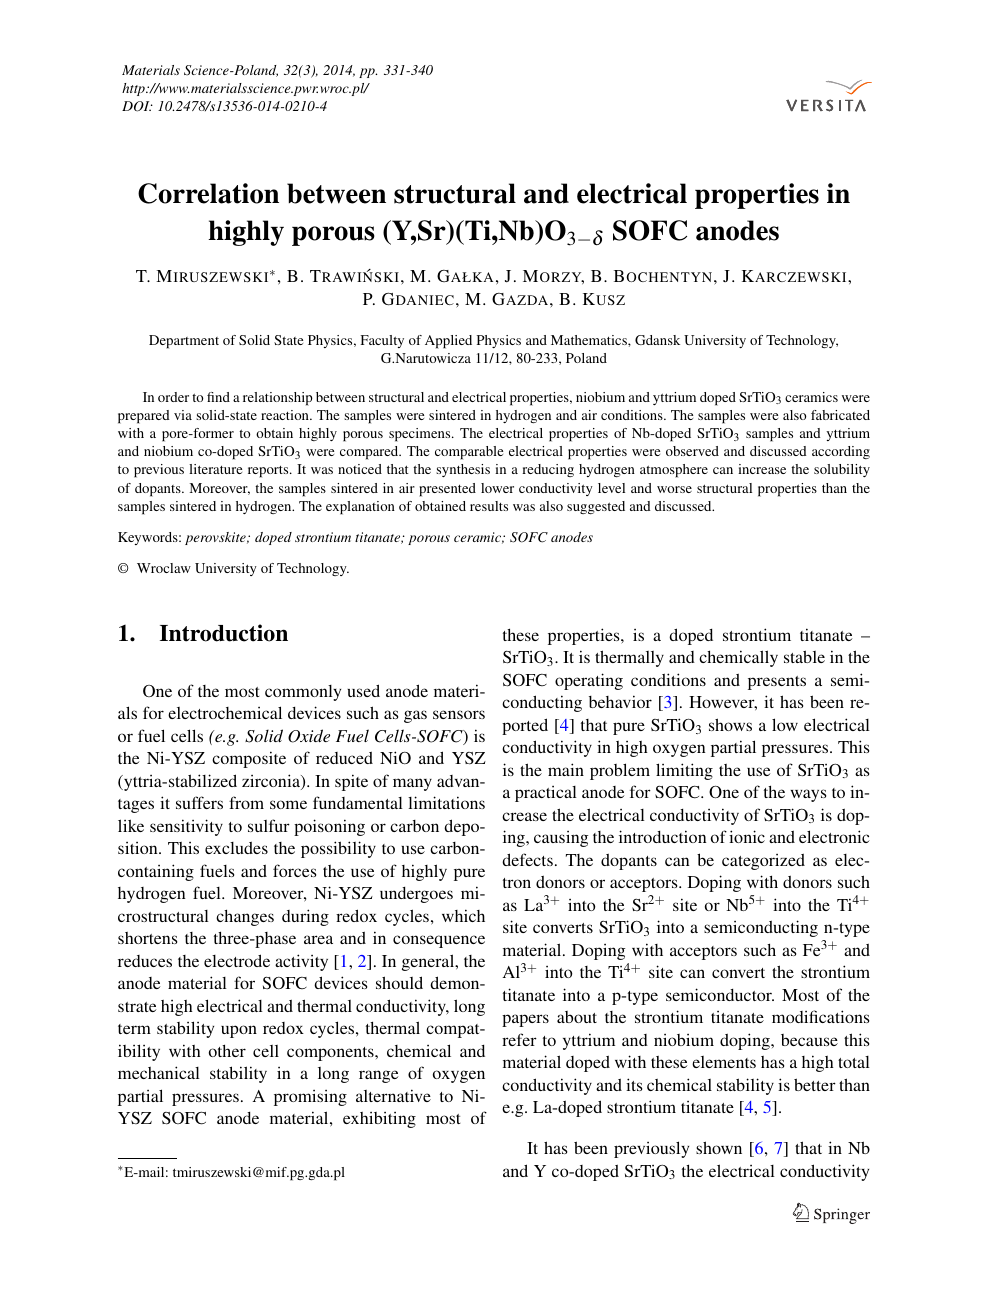 Correlation Between Structural And Electrical Properties In Highly Porous Y Sr Ti Nb O3 D Sofc Anodes Topic Of Research Paper In Chemical Sciences Download Scholarly Article Pdf And Read For Free On Cyberleninka Open Science